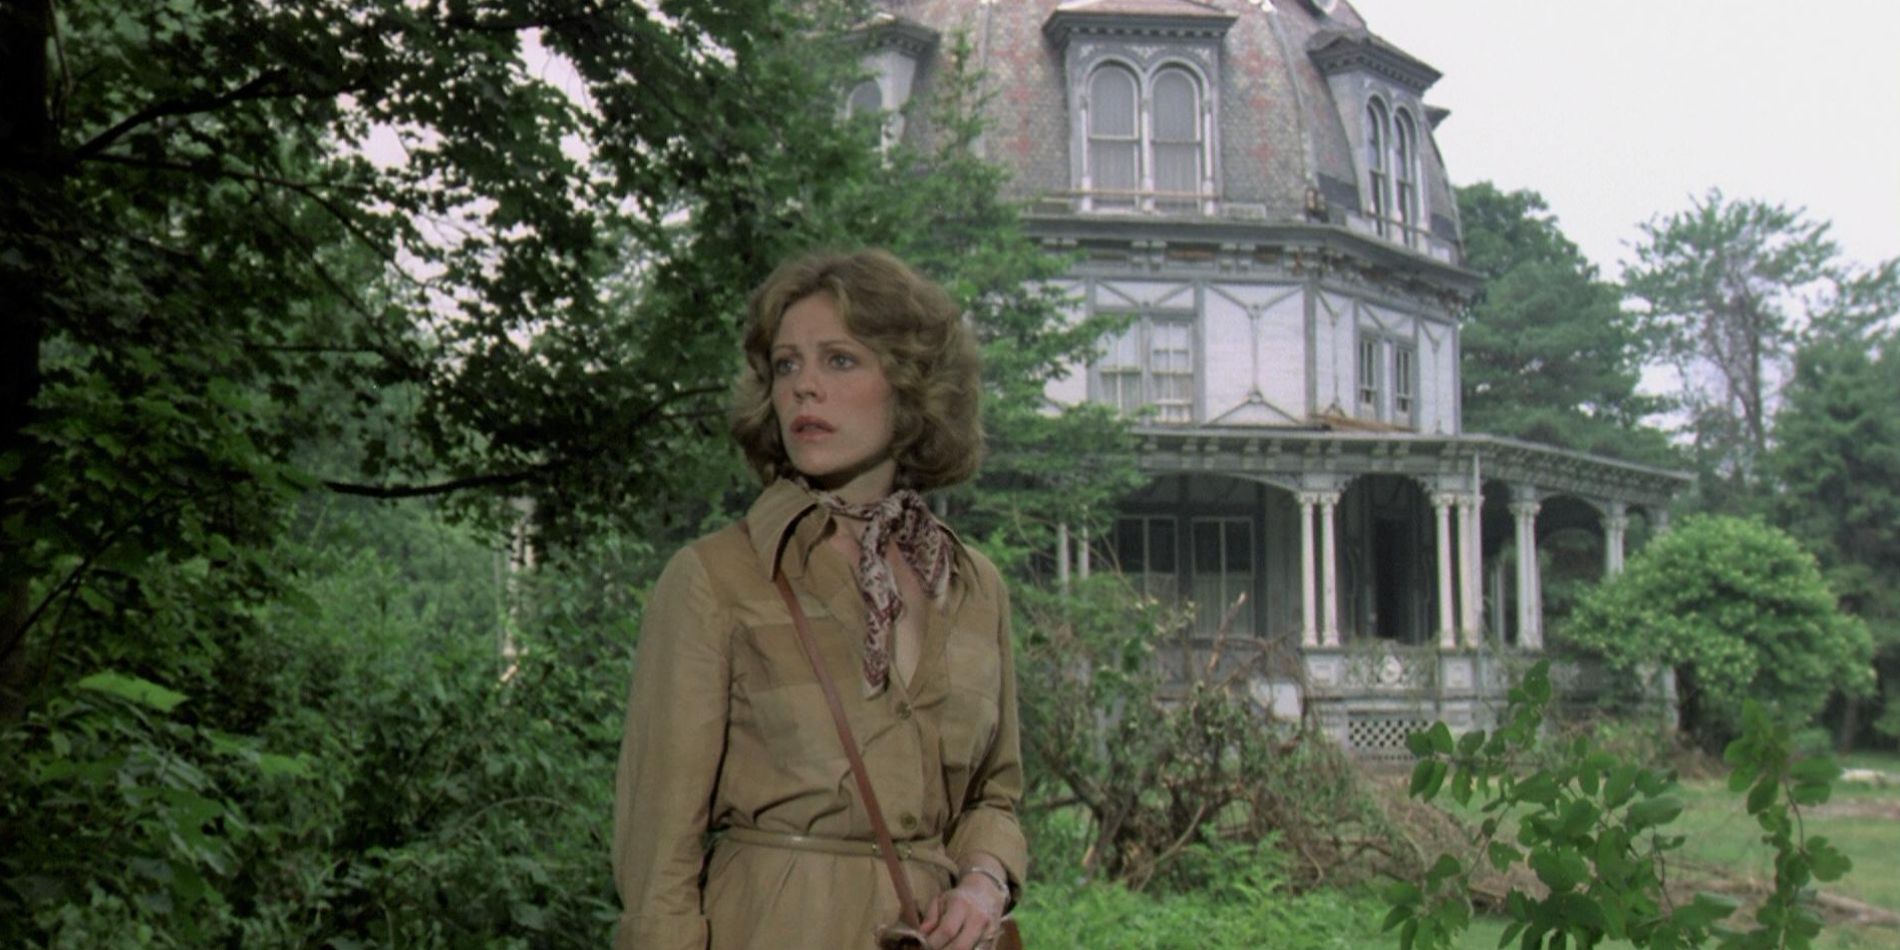 Lauren stands outside a haunted mansion in the 1981 film The Nesting.